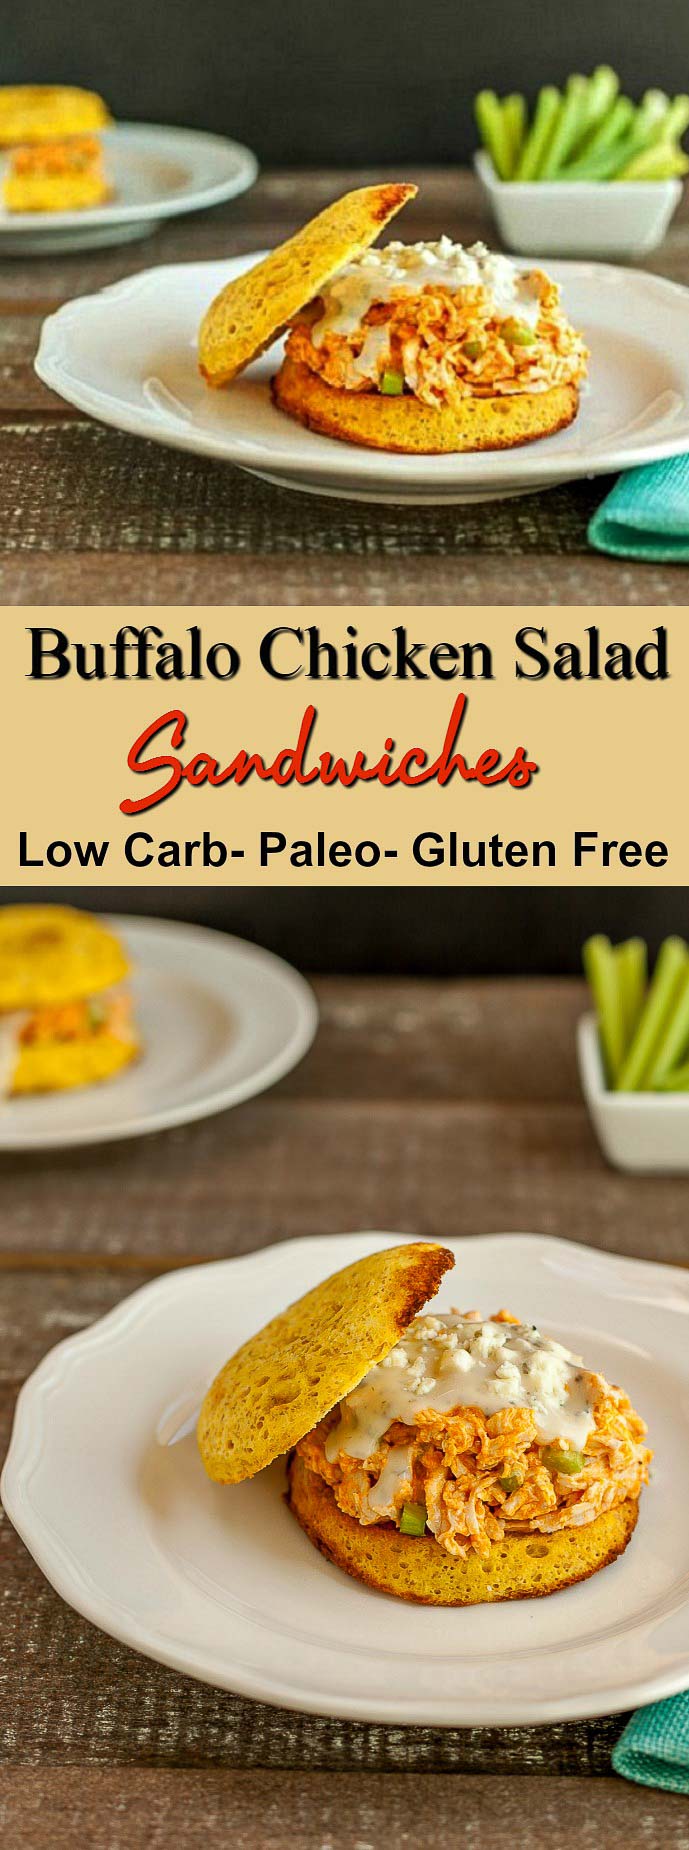 Buffalo Ranch Chicken Salad Sandwiches- Low carb, paleo and gluten free. Includes a Low Carb Quick Bun recipe.